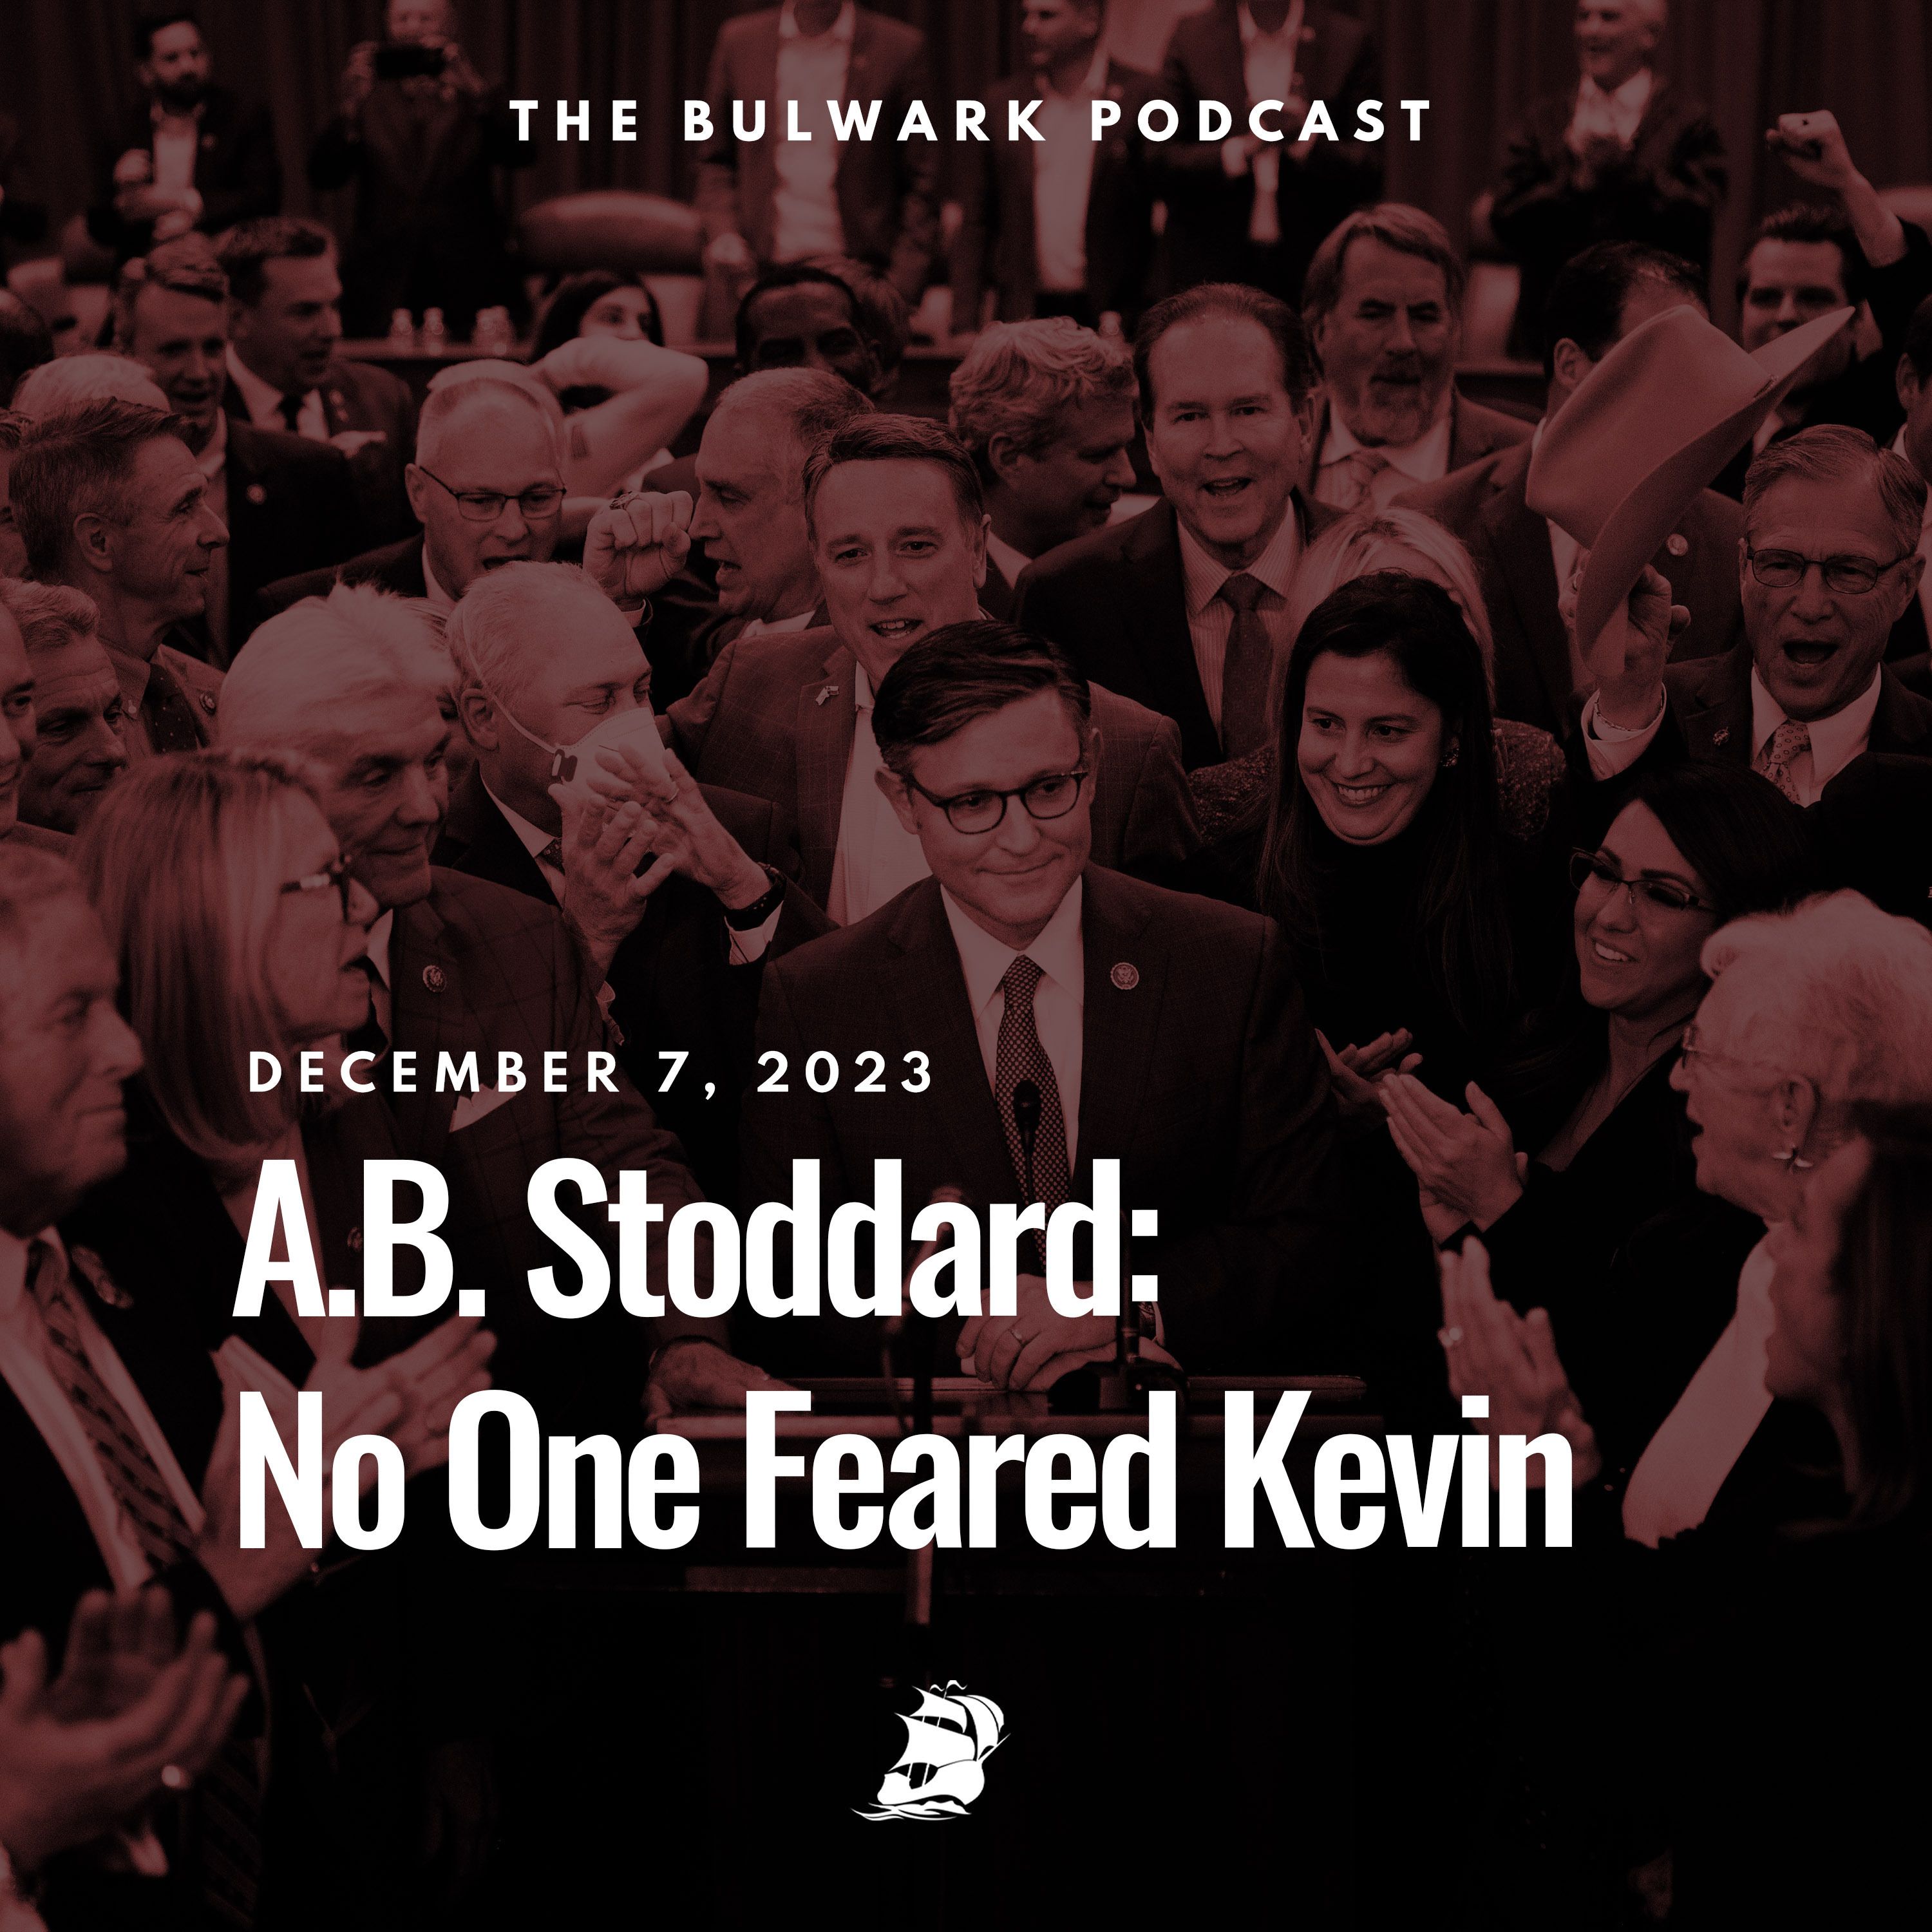 A.B. Stoddard: No One Feared Kevin